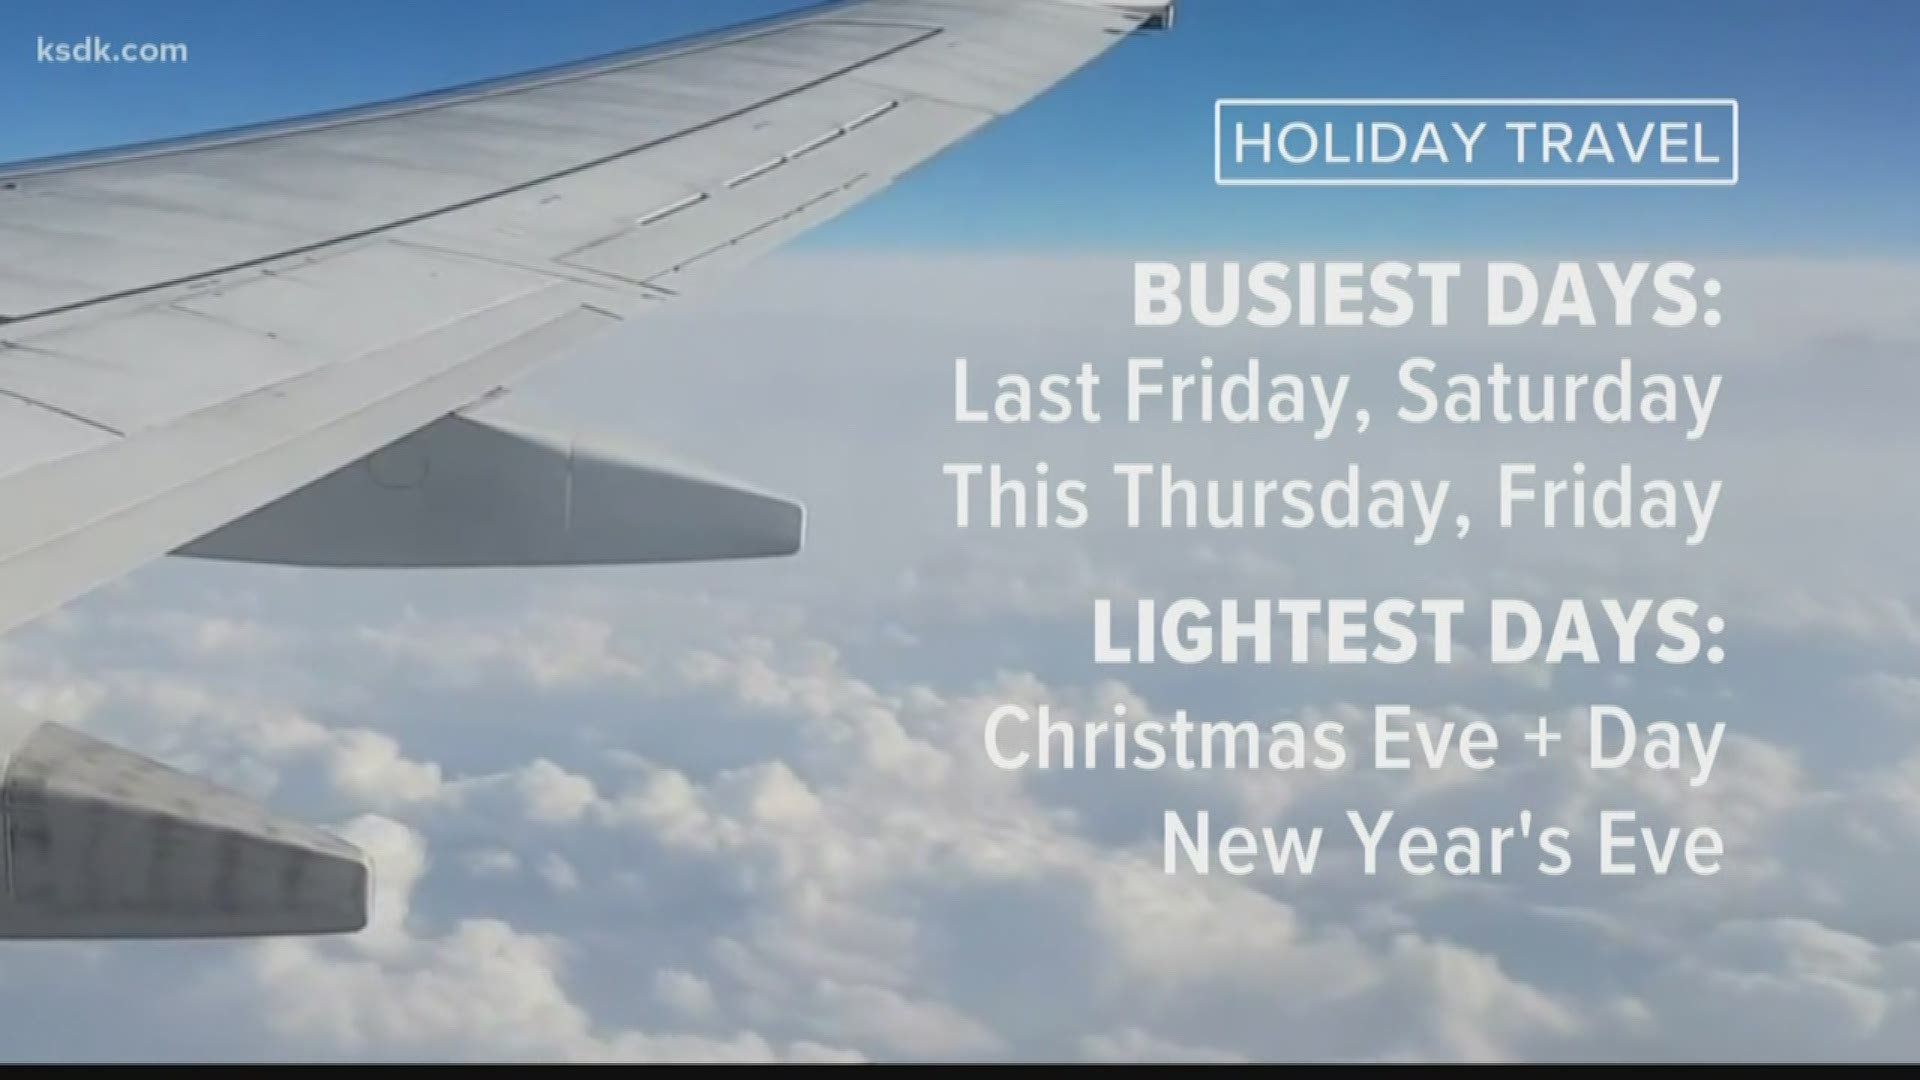 Millions of people will take to the friendly skies for the holidays. We have a look at what that means if you or someone you love has travel plans.